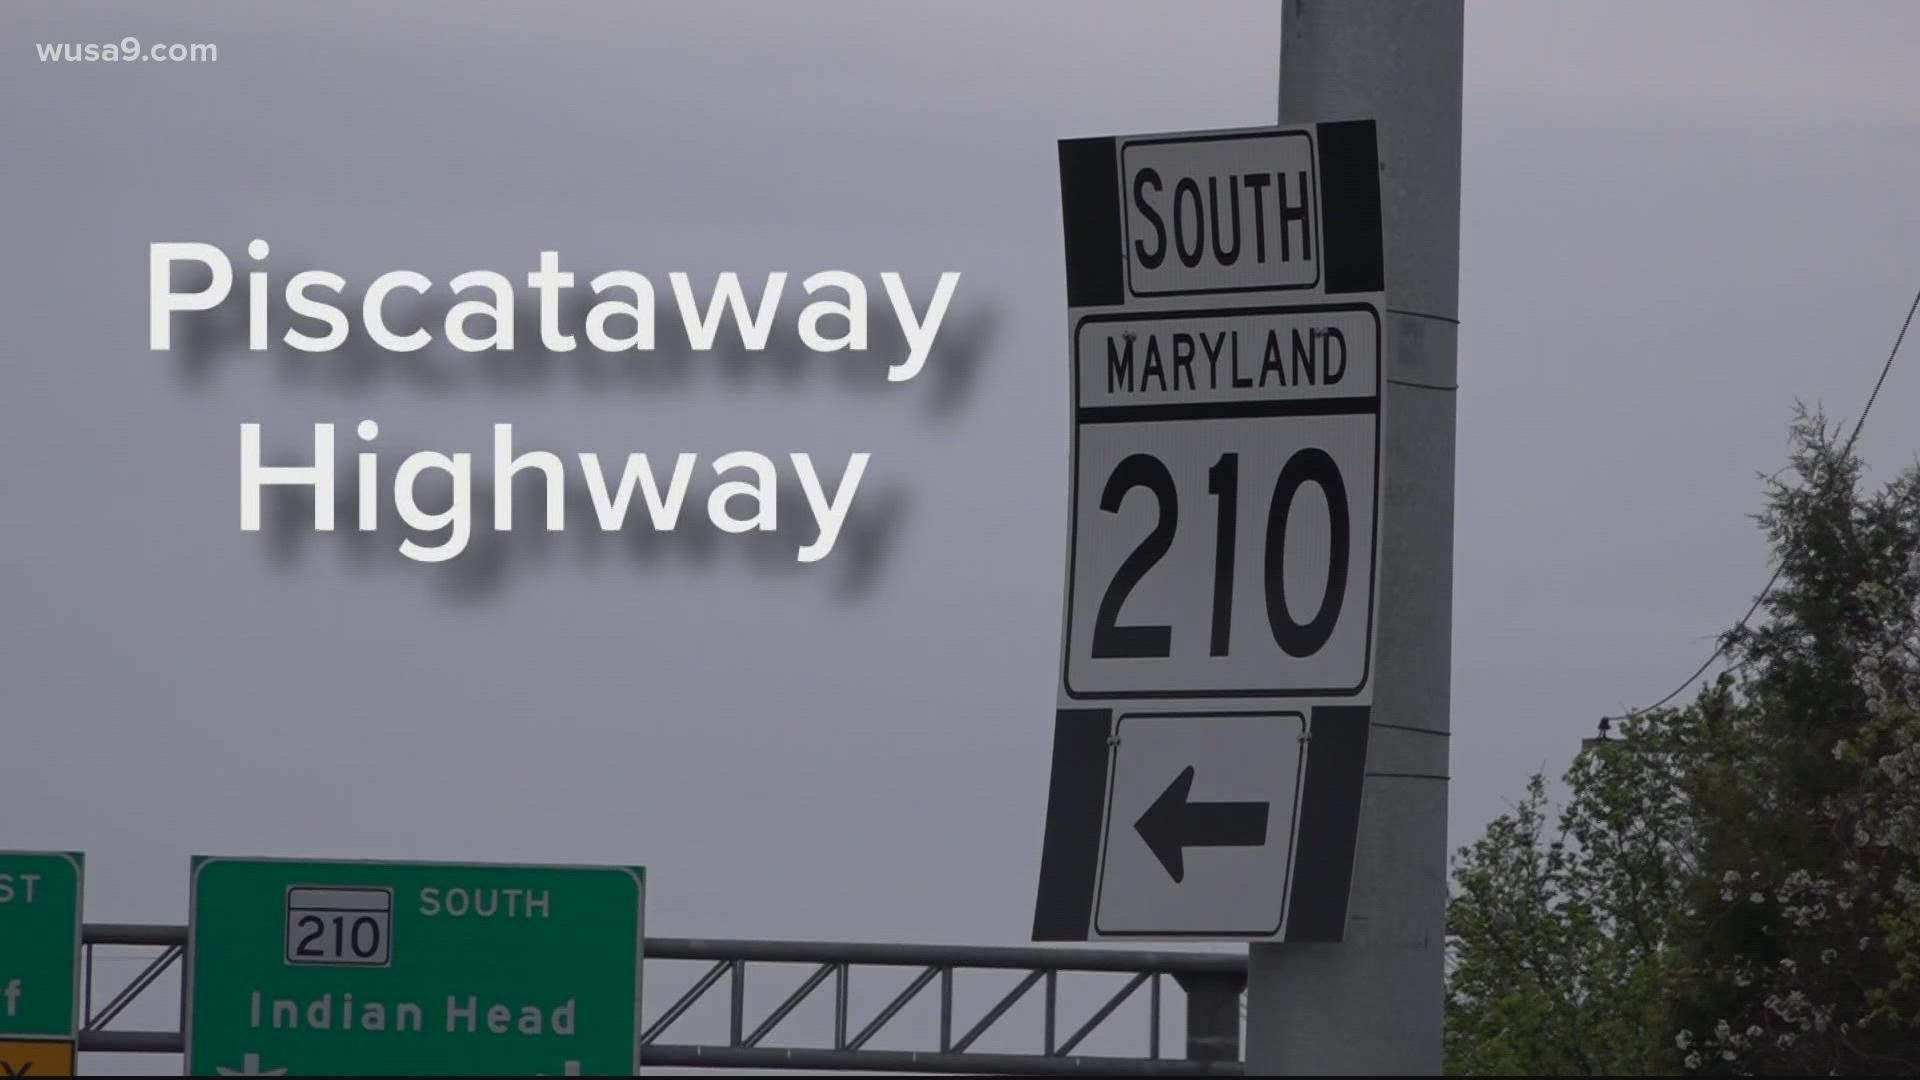 A bill to rename the Maryland Route 210 Piscataway Highway is gaining momentum